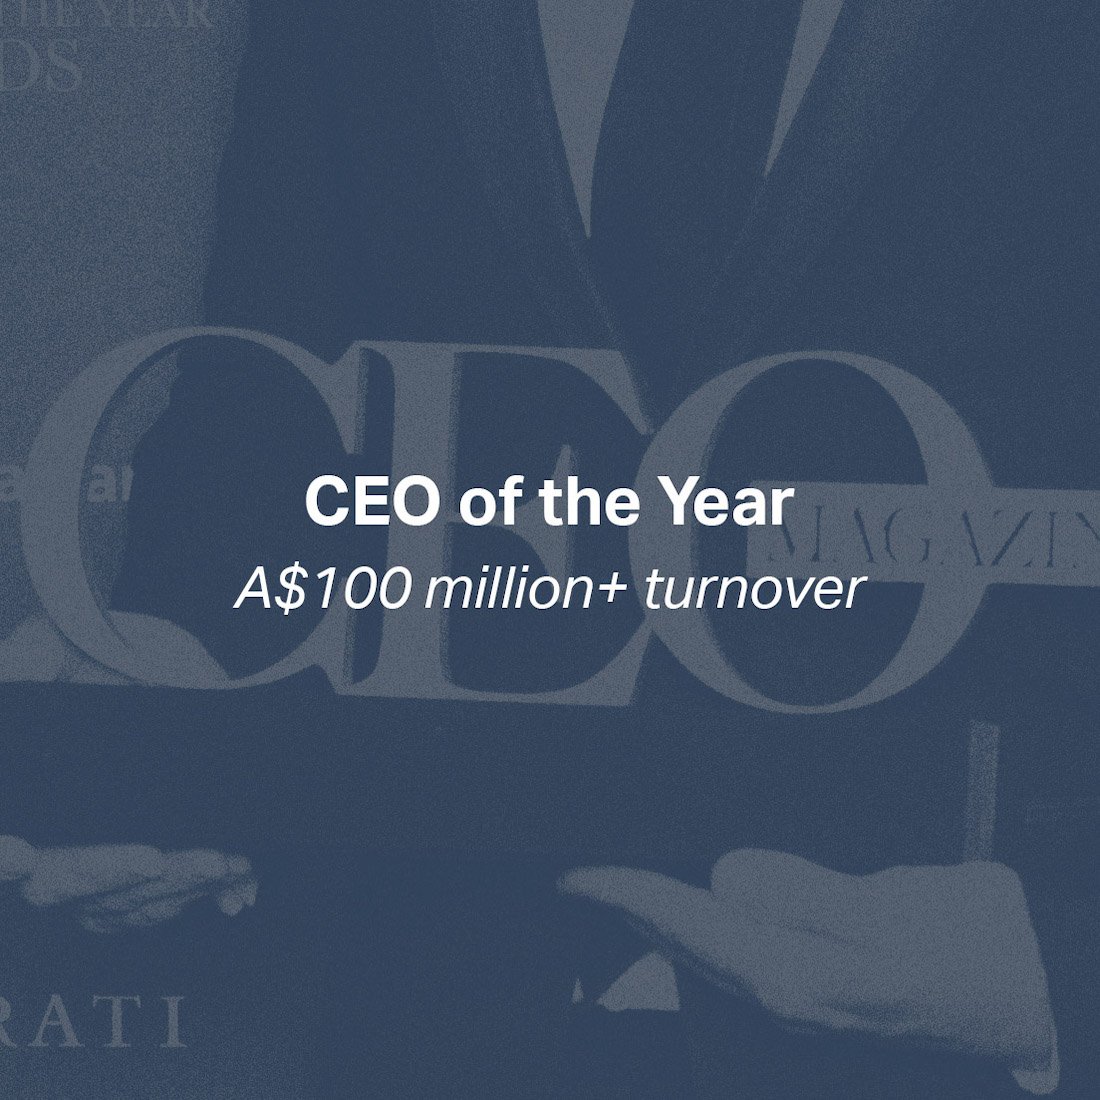 CEO of the Year - A$100 million+ turnover